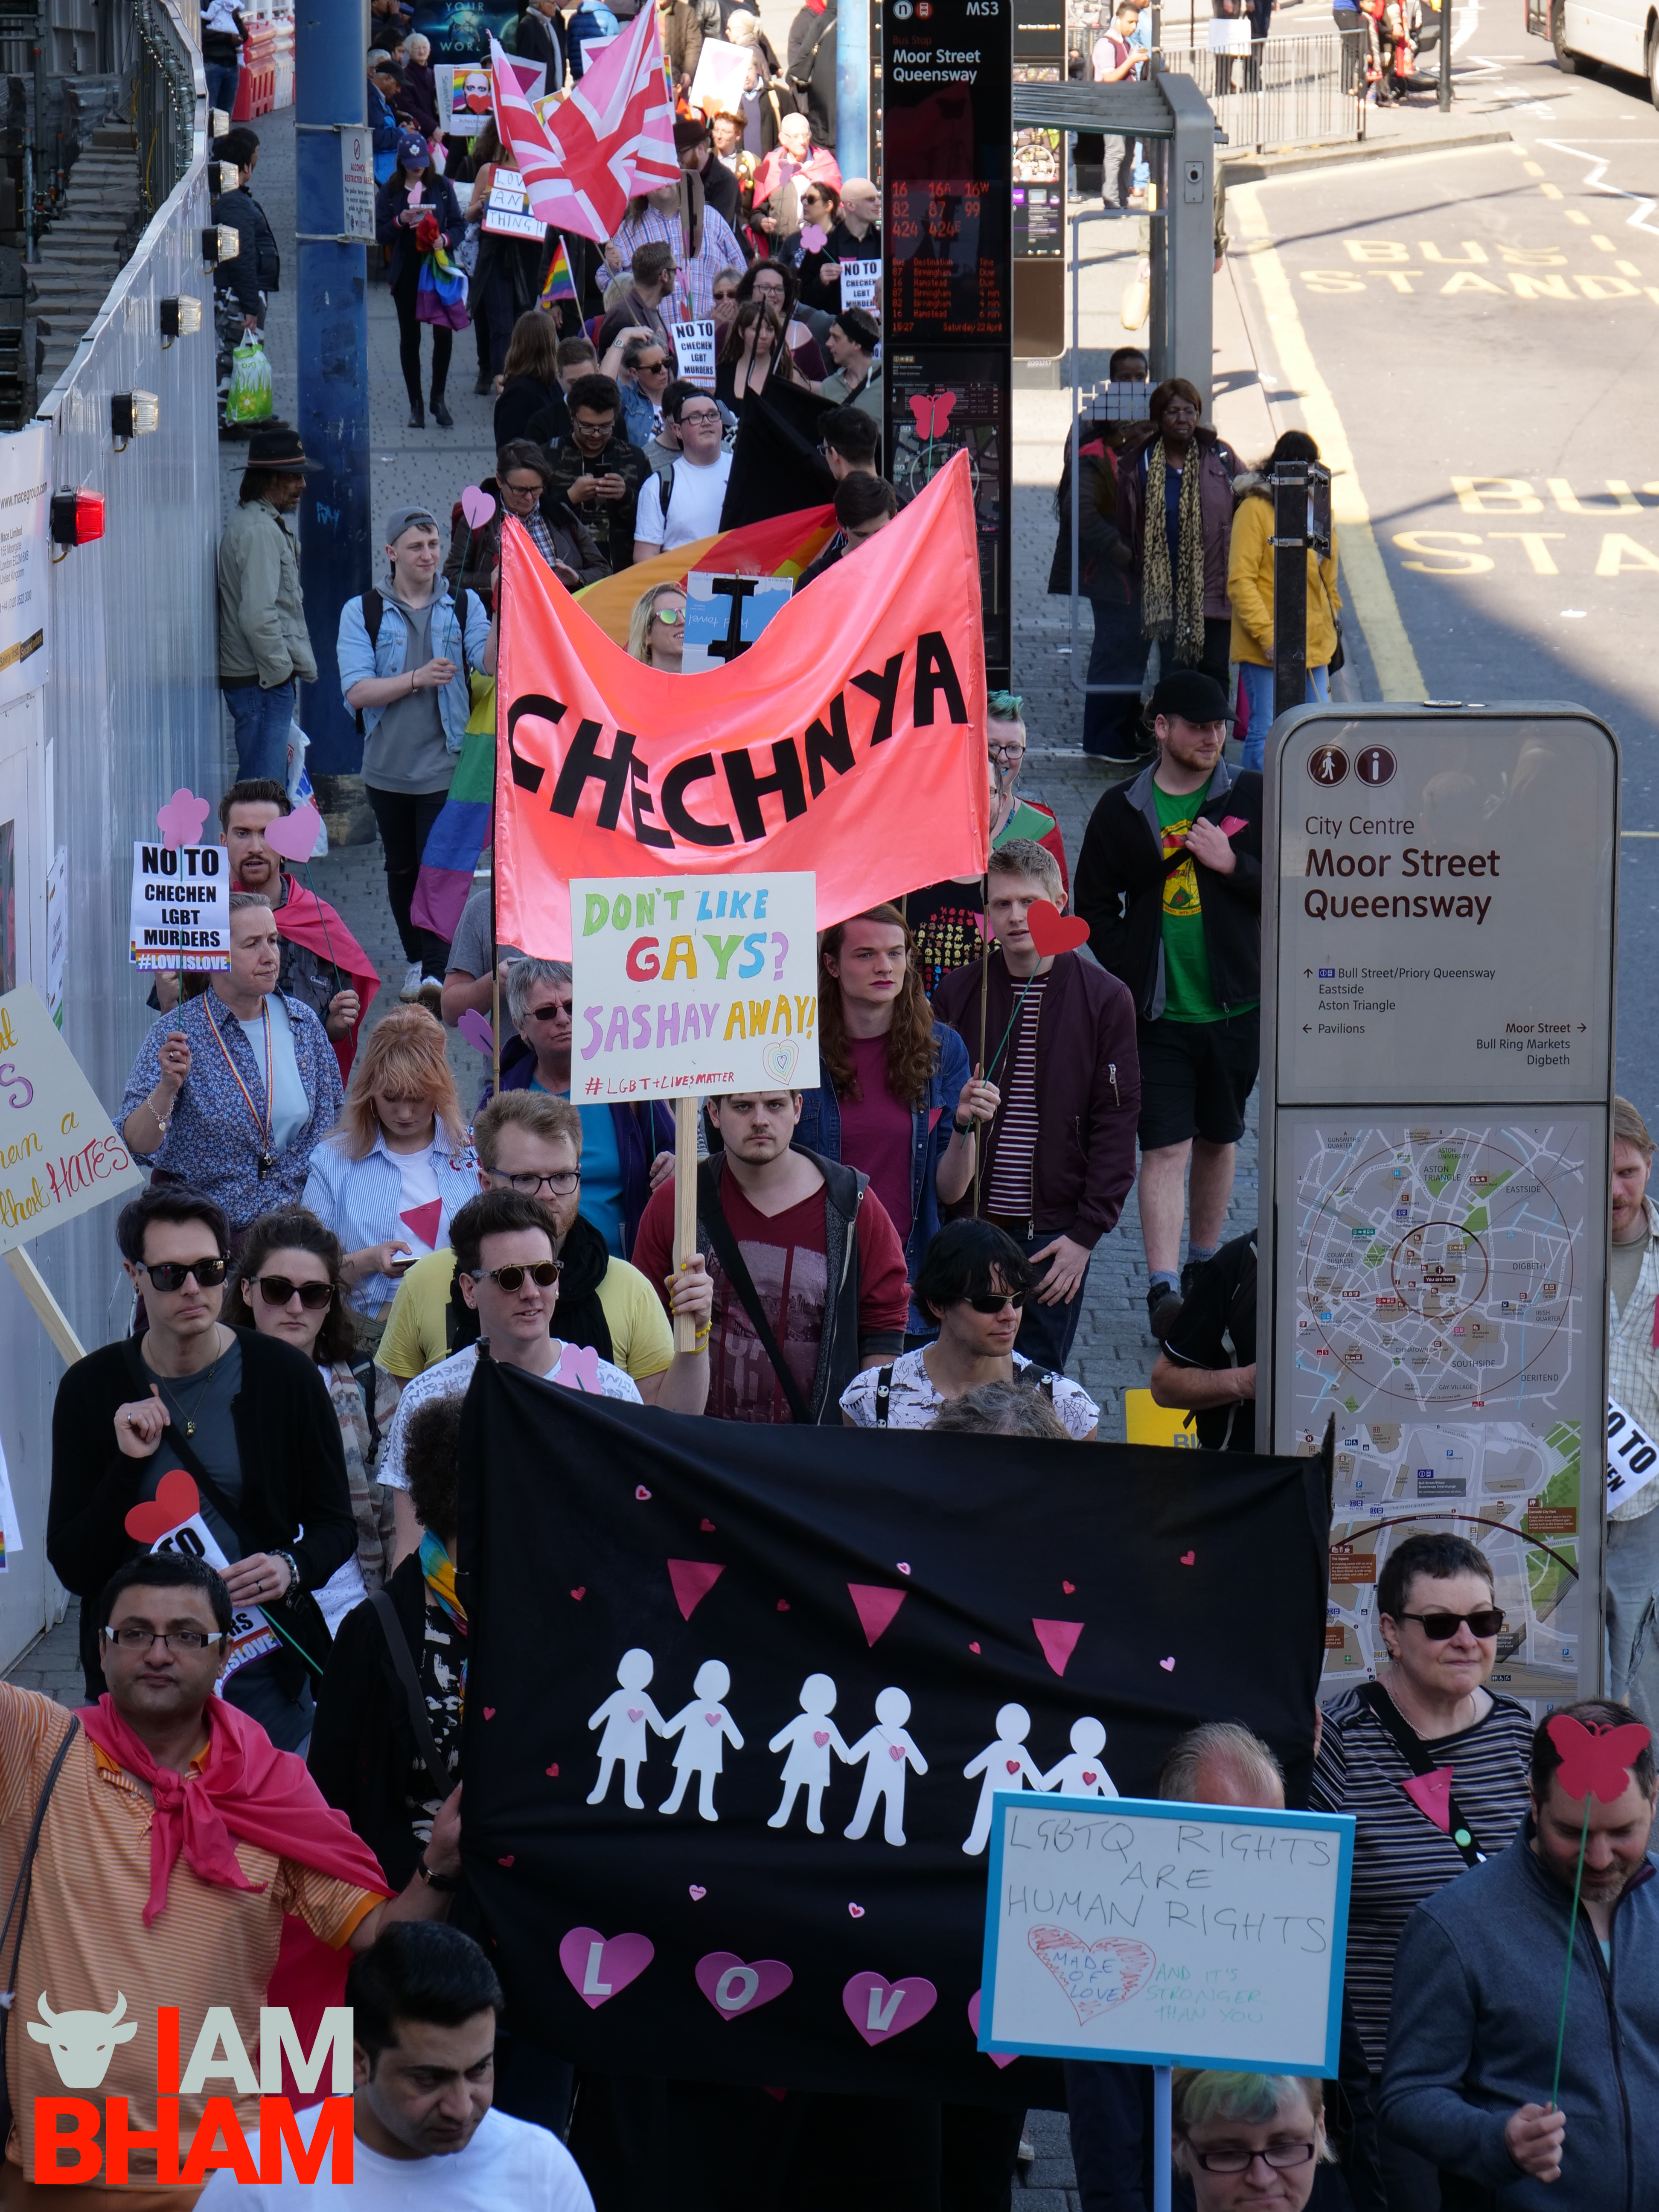 Protesters march through Birmingham city centre in defence of LGBT rights (Photograph: Adam Yosef)